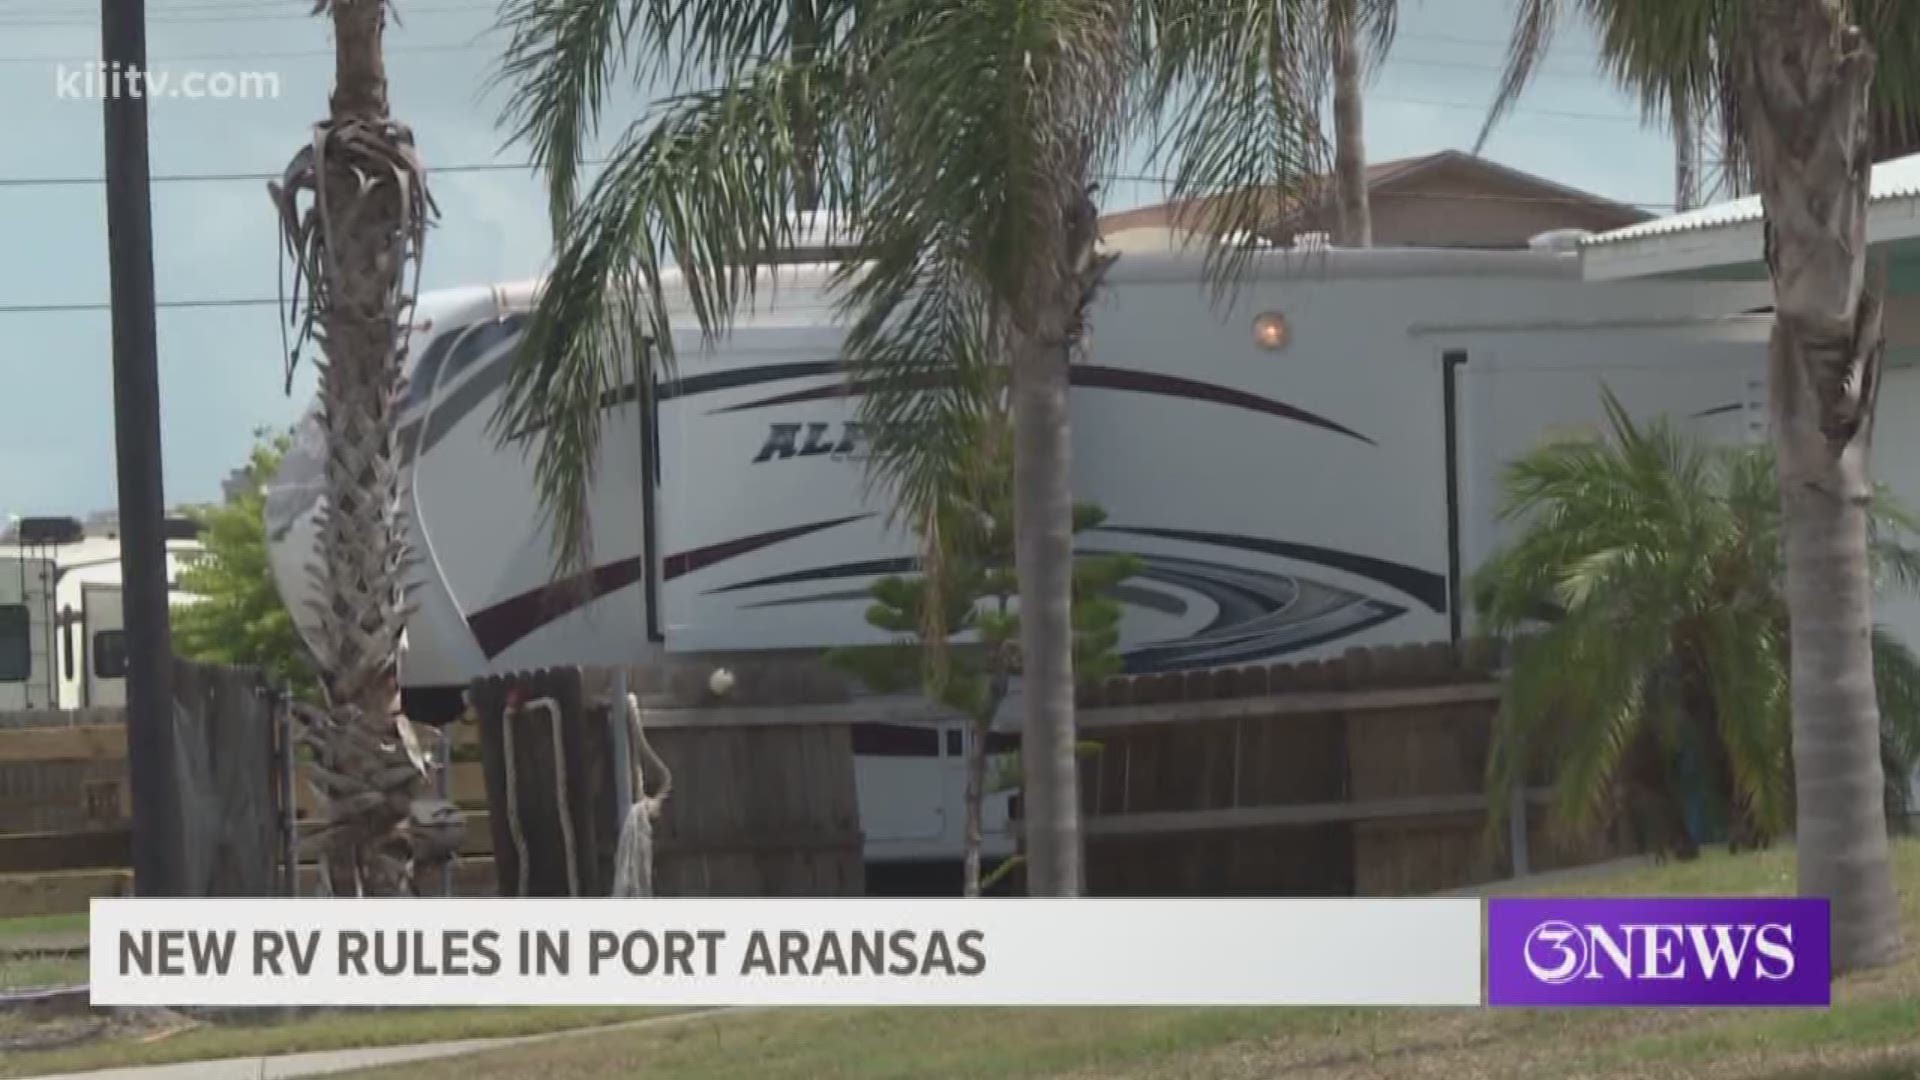 Port Aransas City Council is moving to get their residents to stop living out of RV's unless they have a building permit that shows they intend to rebuild their hurr